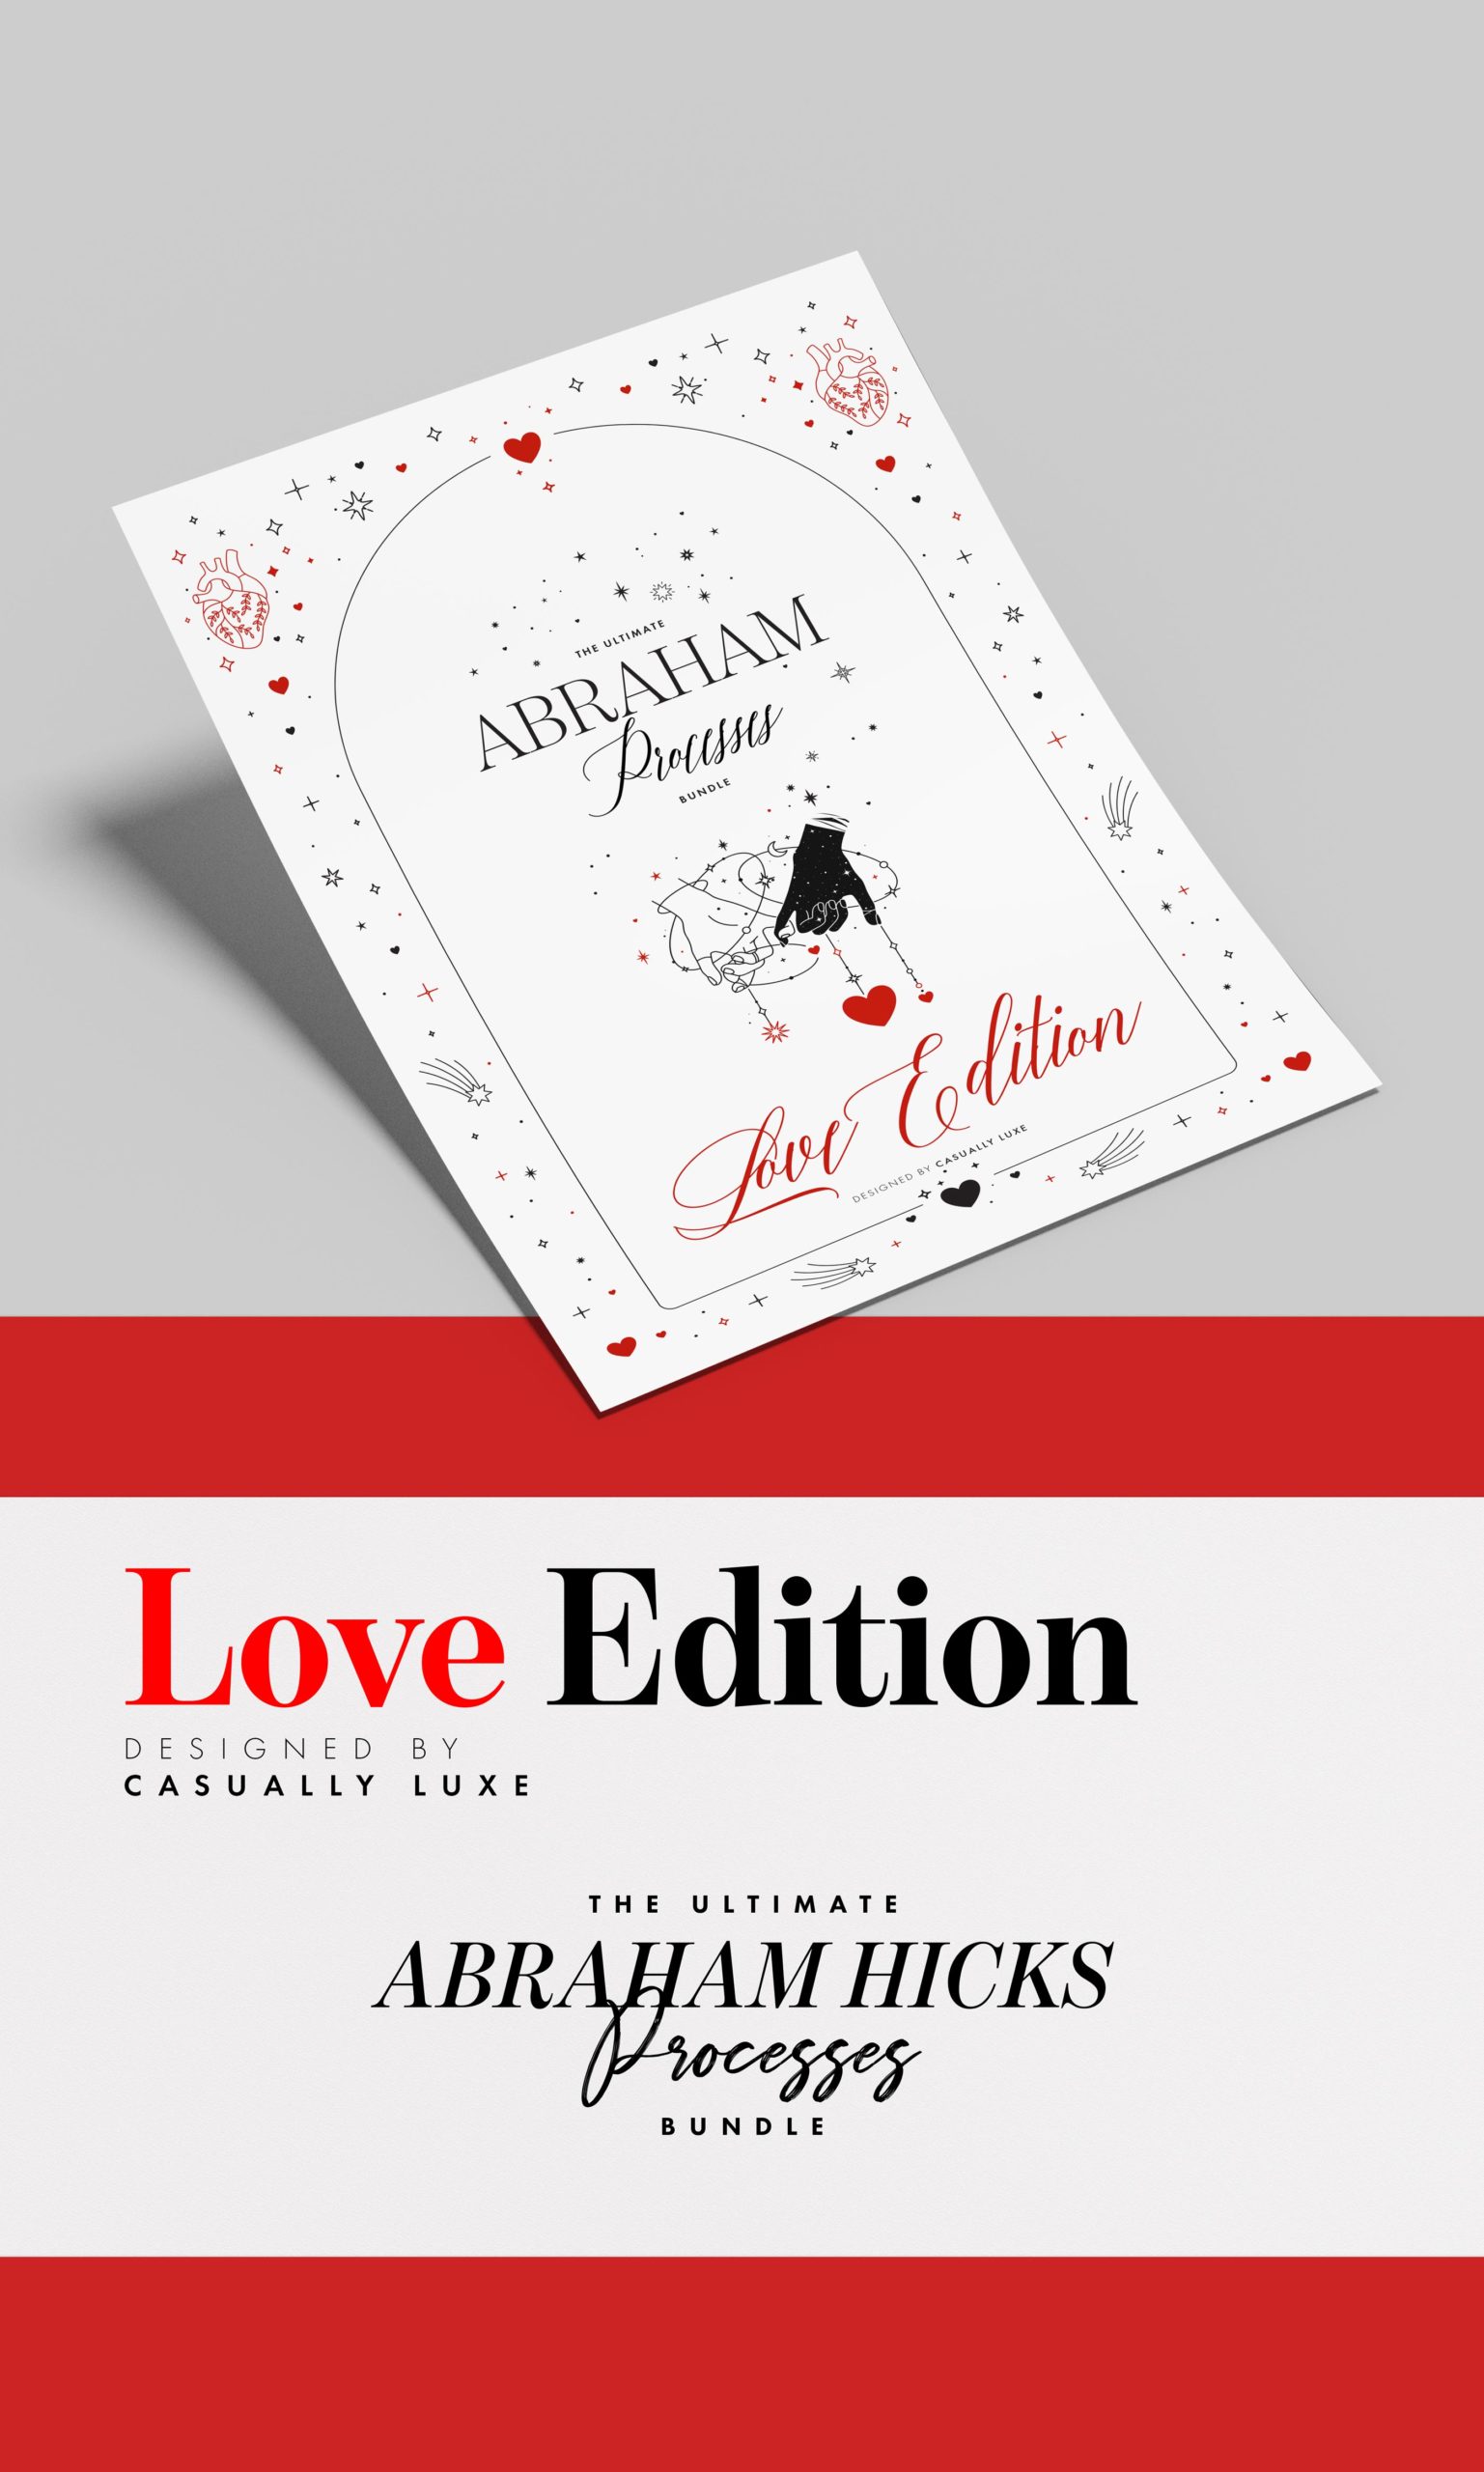 Attract Love Abraham hicks Journal Bundle by Casually Luxe - Love Edition